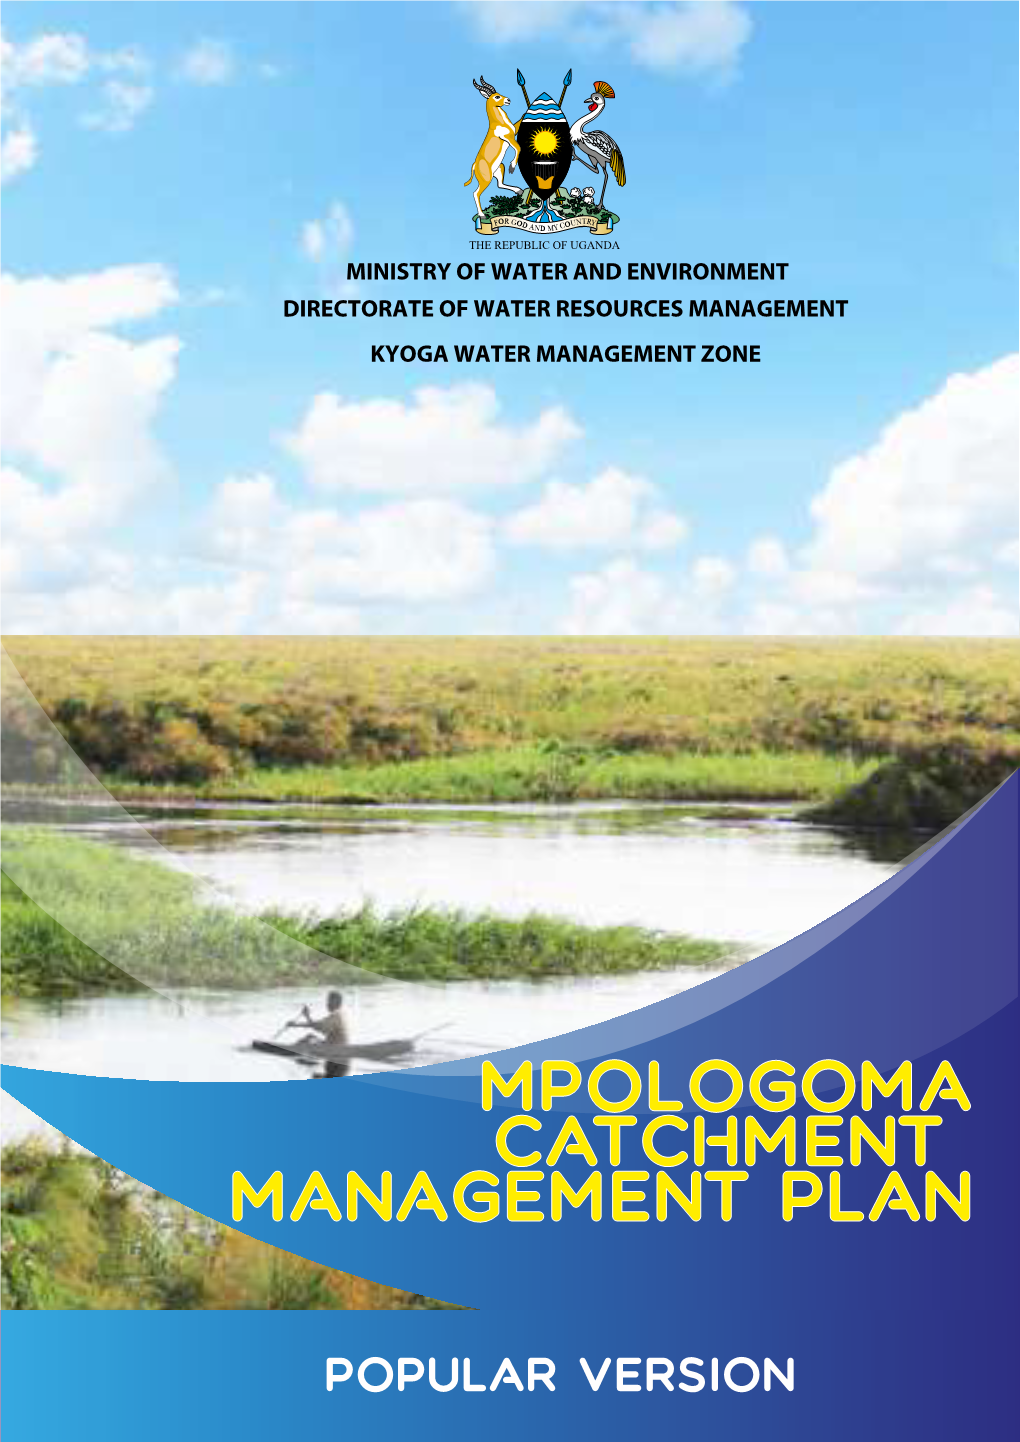 Mpologoma Catchment Management Plan (CMP) Summarises the Main Findings and the Key Messages